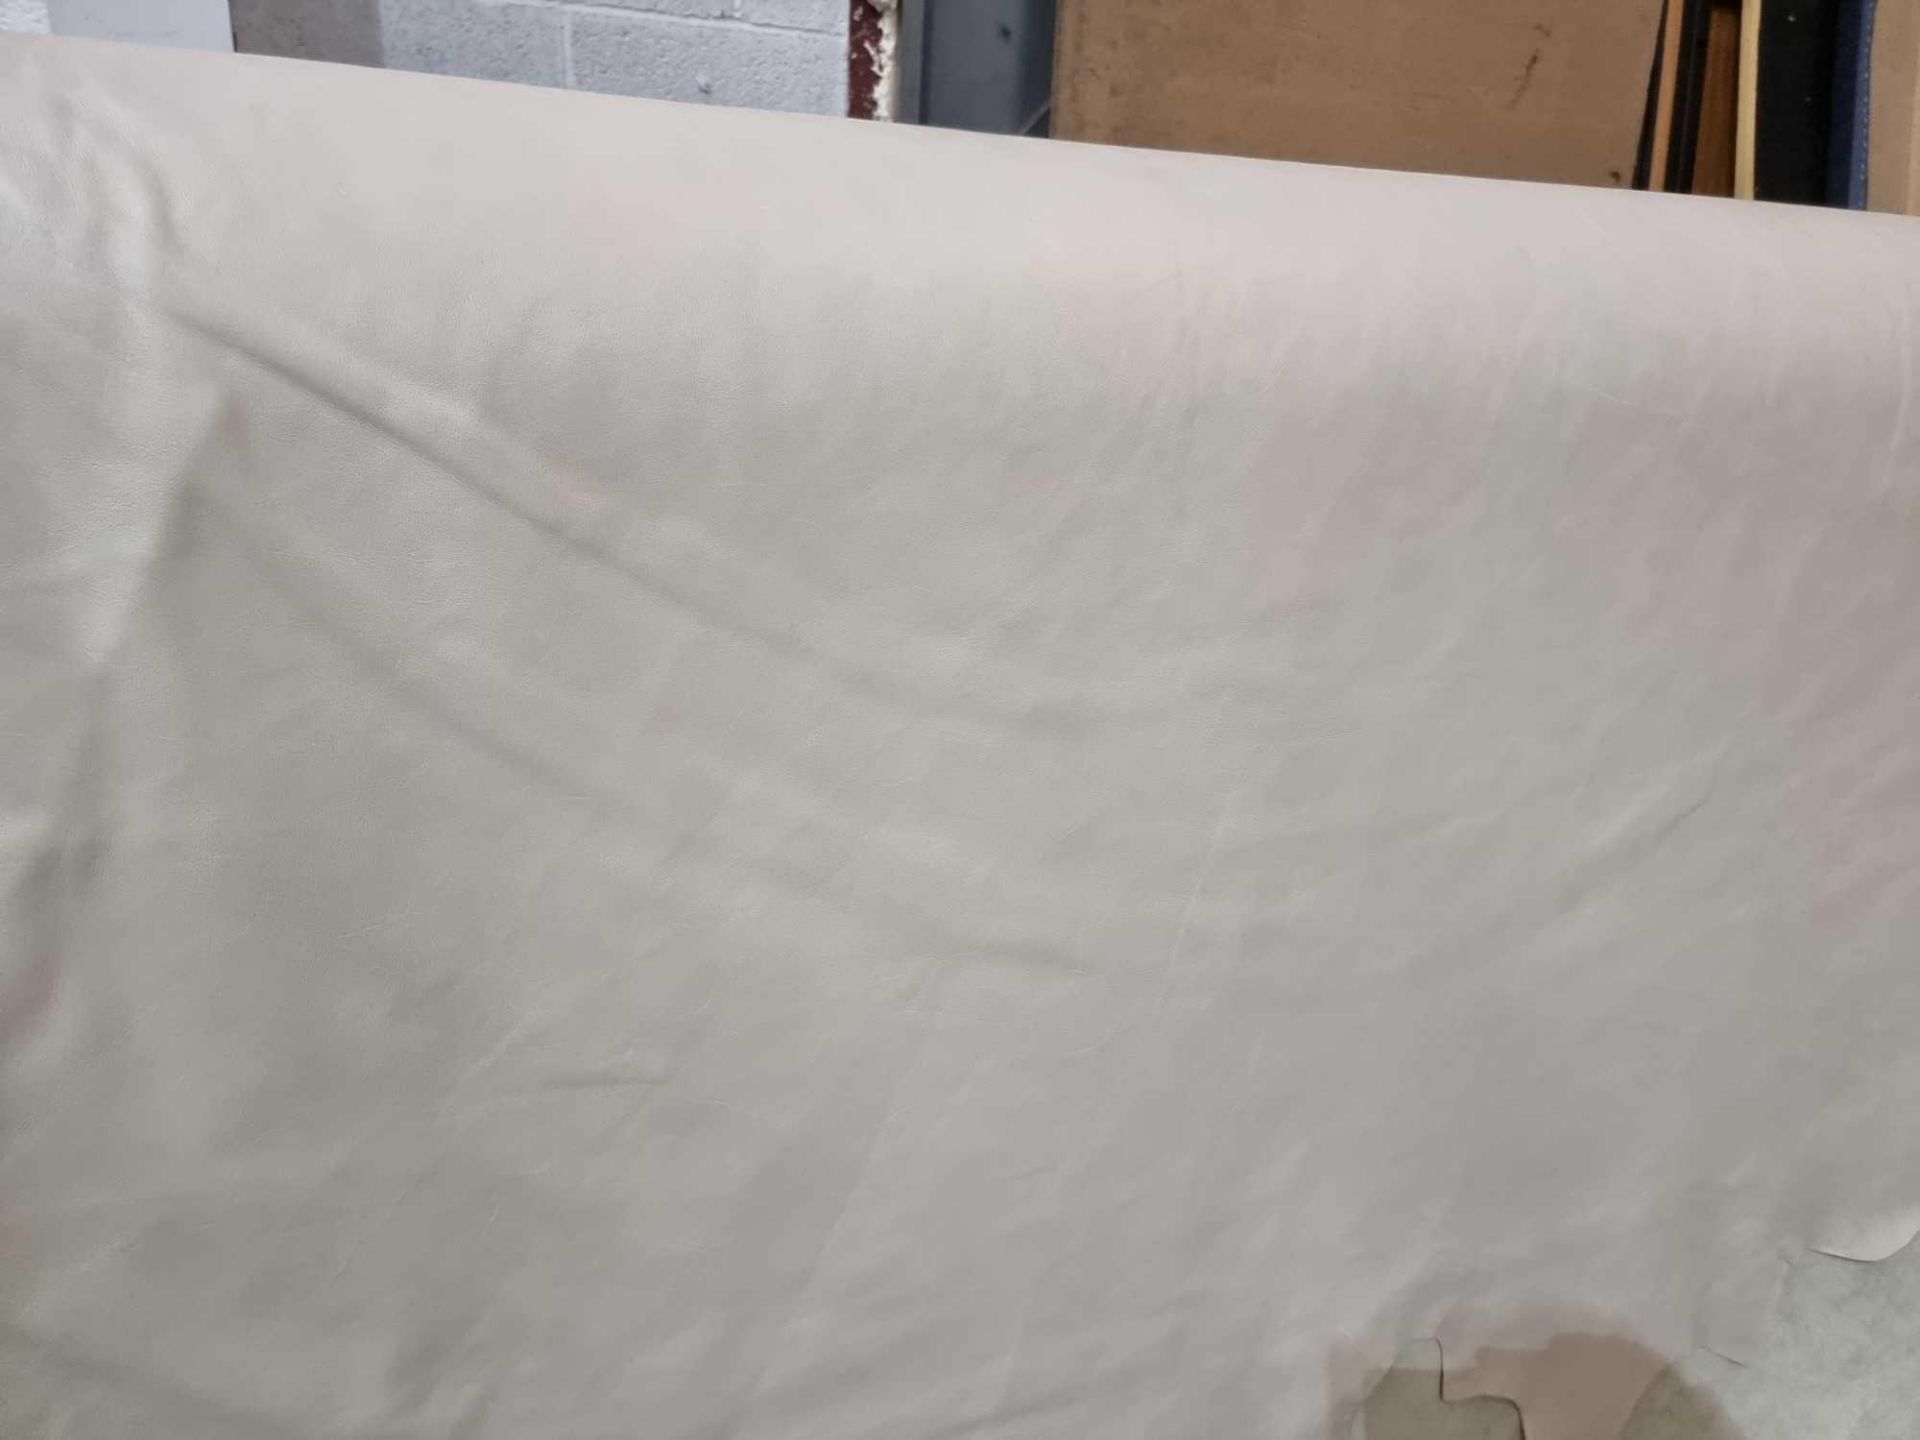 Yarwood Mustang White Leather Hide approximately 4.83mÂ² 2.3 x 2.1cm